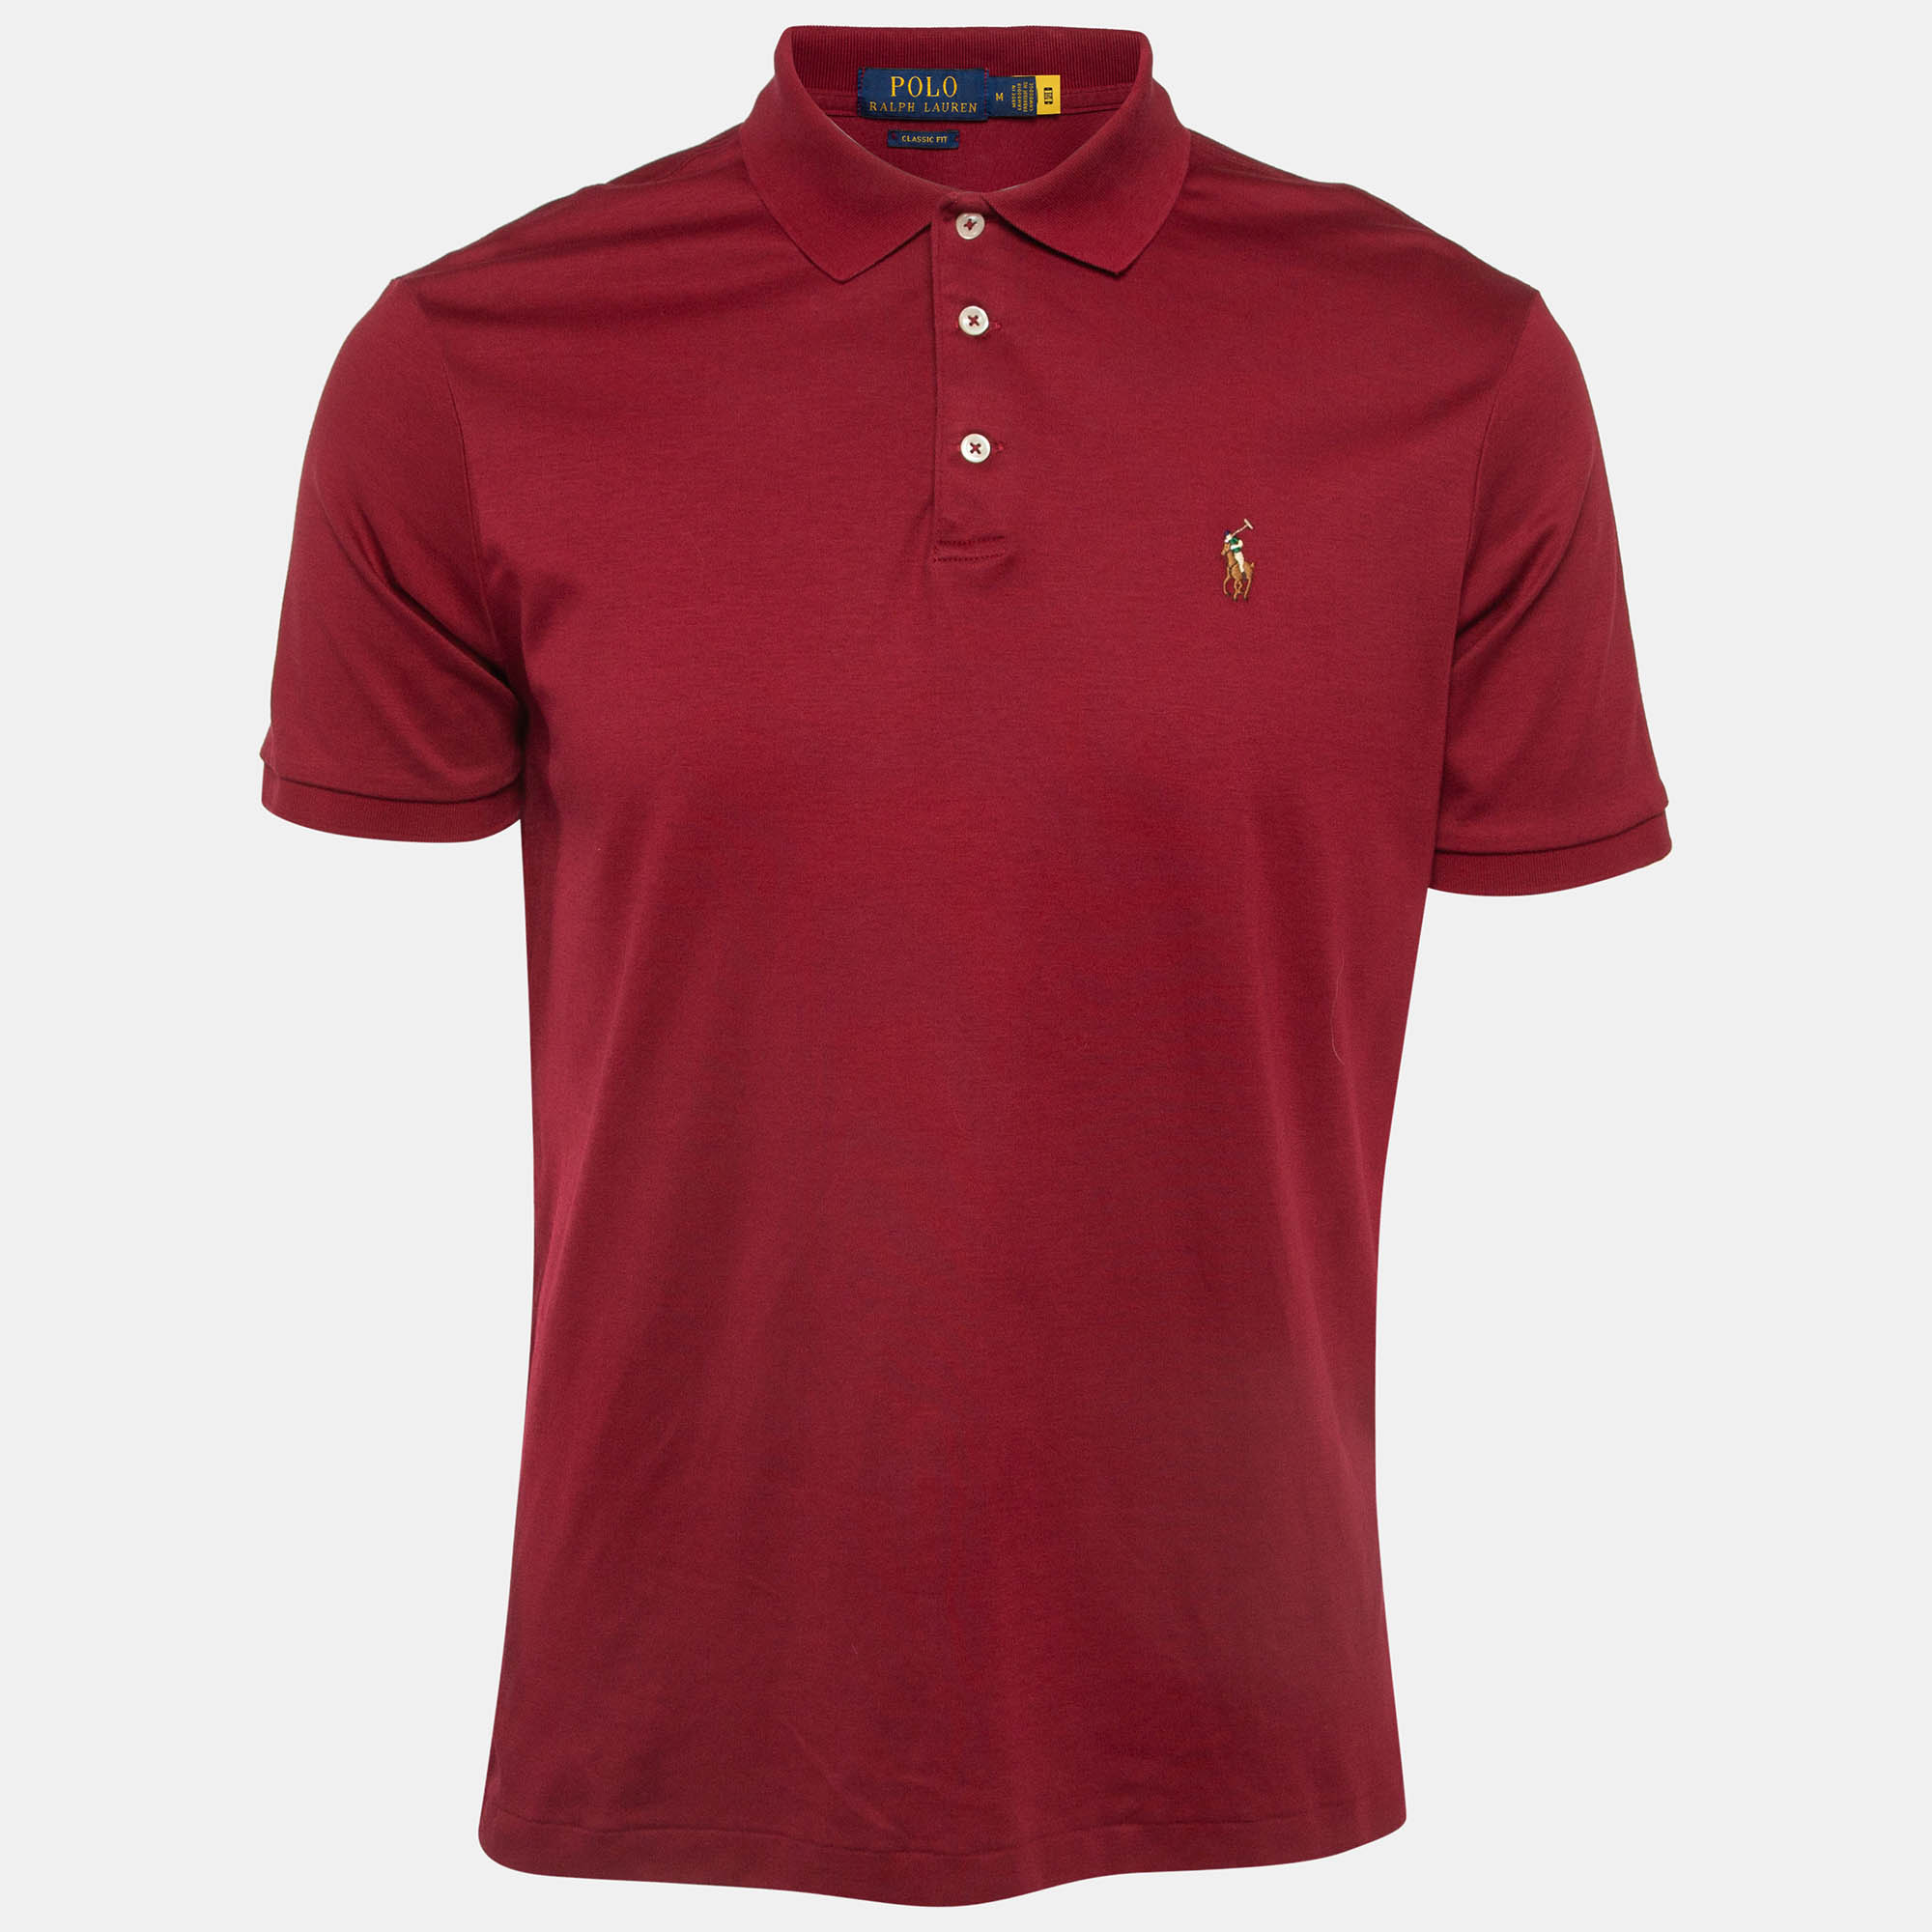 Polo ralph lauren red cotton jersey classic fit polo t-shirt m